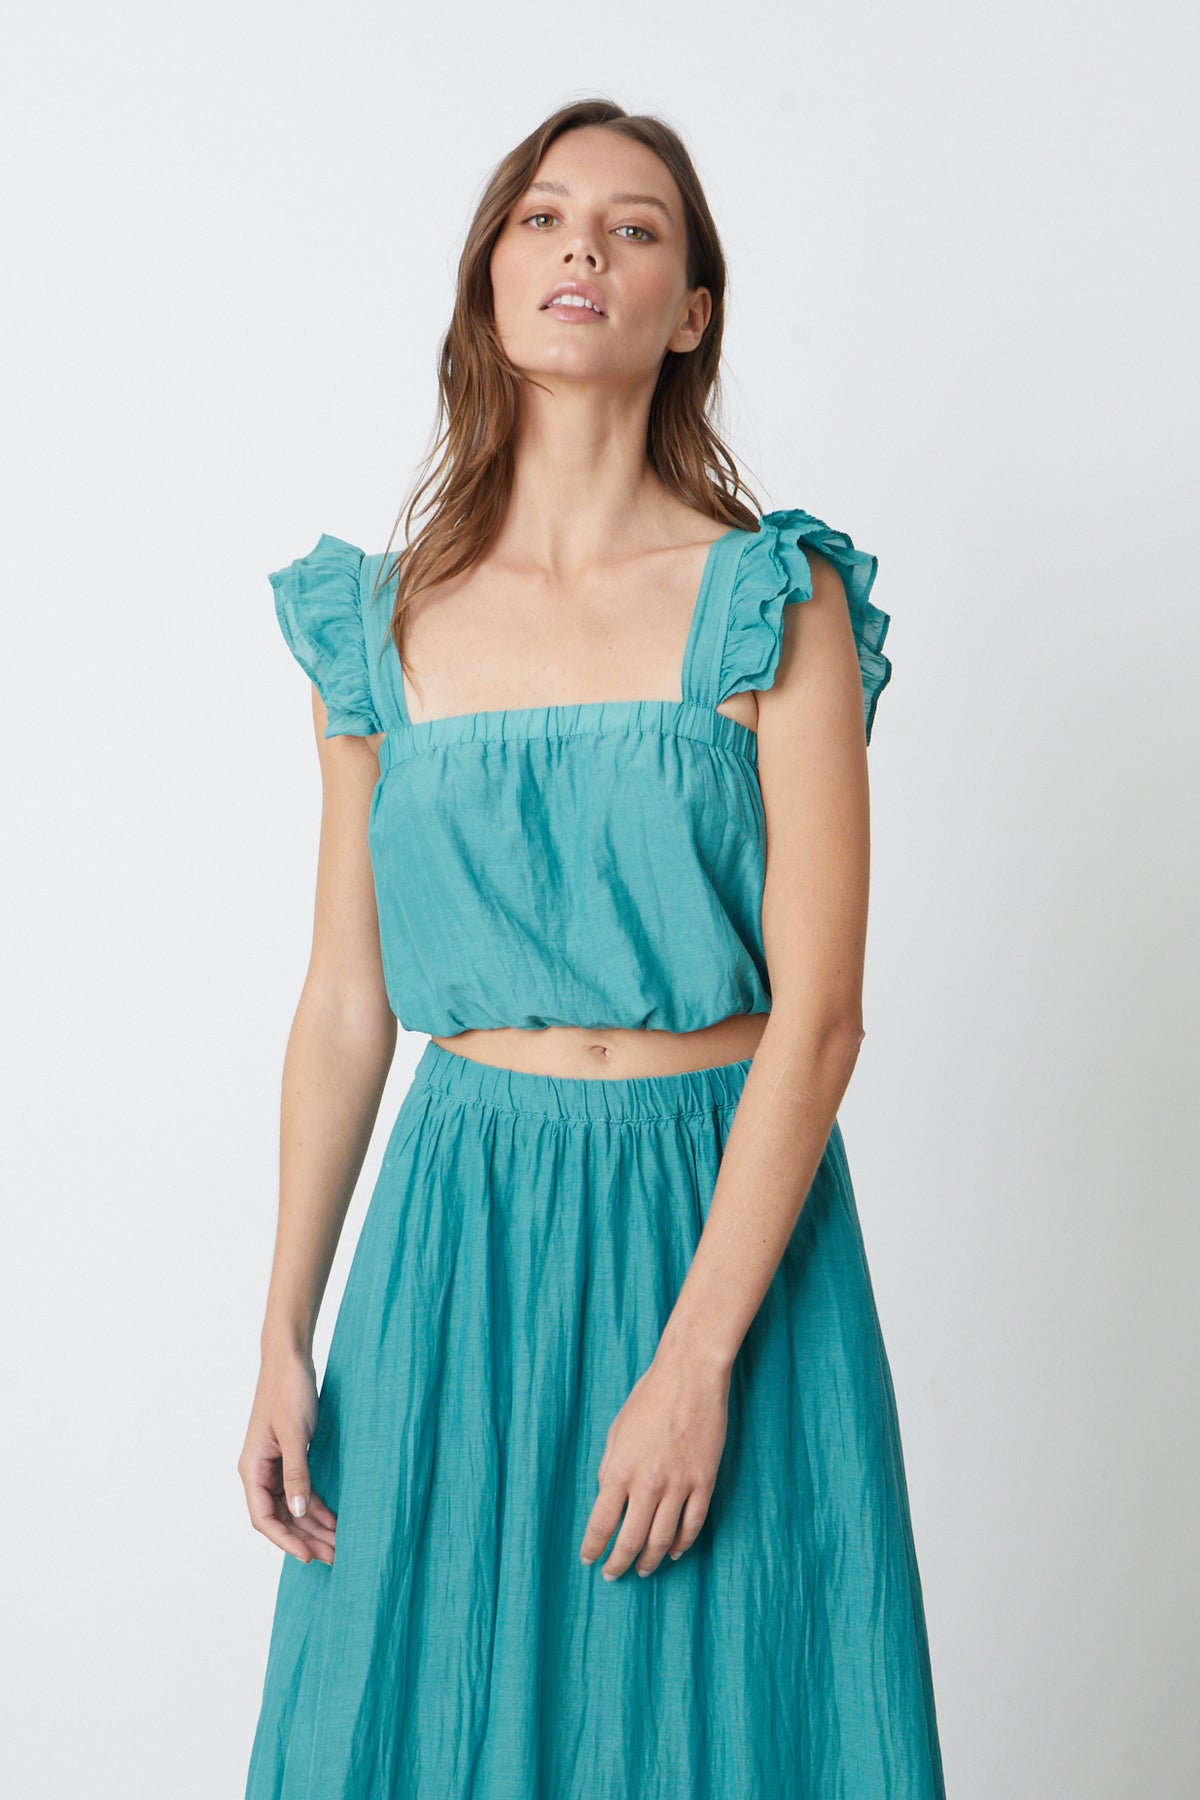   The model is wearing a CROPPED TANK TOP by Velvet by Graham & Spencer with ruffled sleeves. 